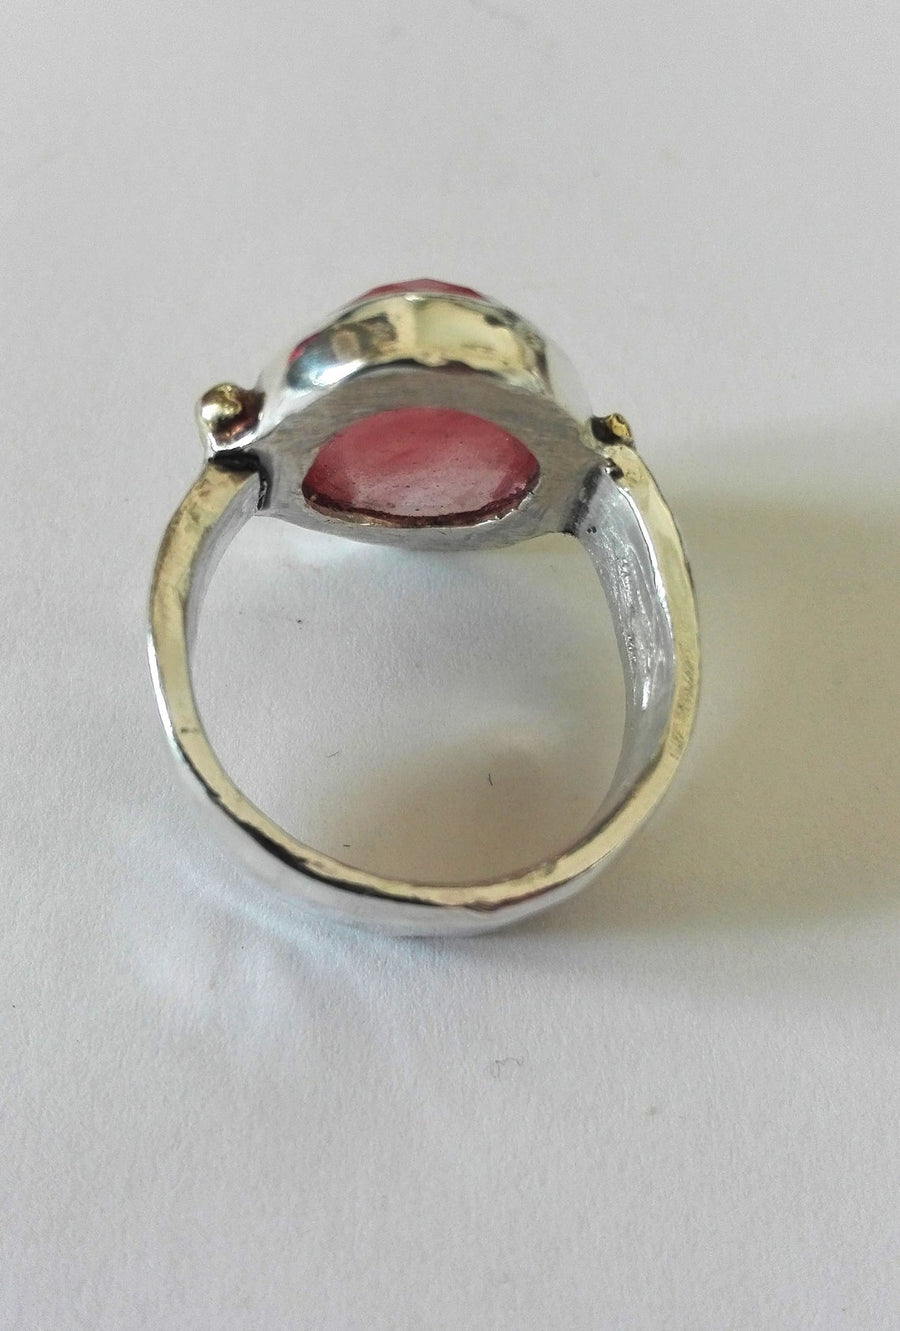 Two Tone Rose Cut Pink Stone Ring